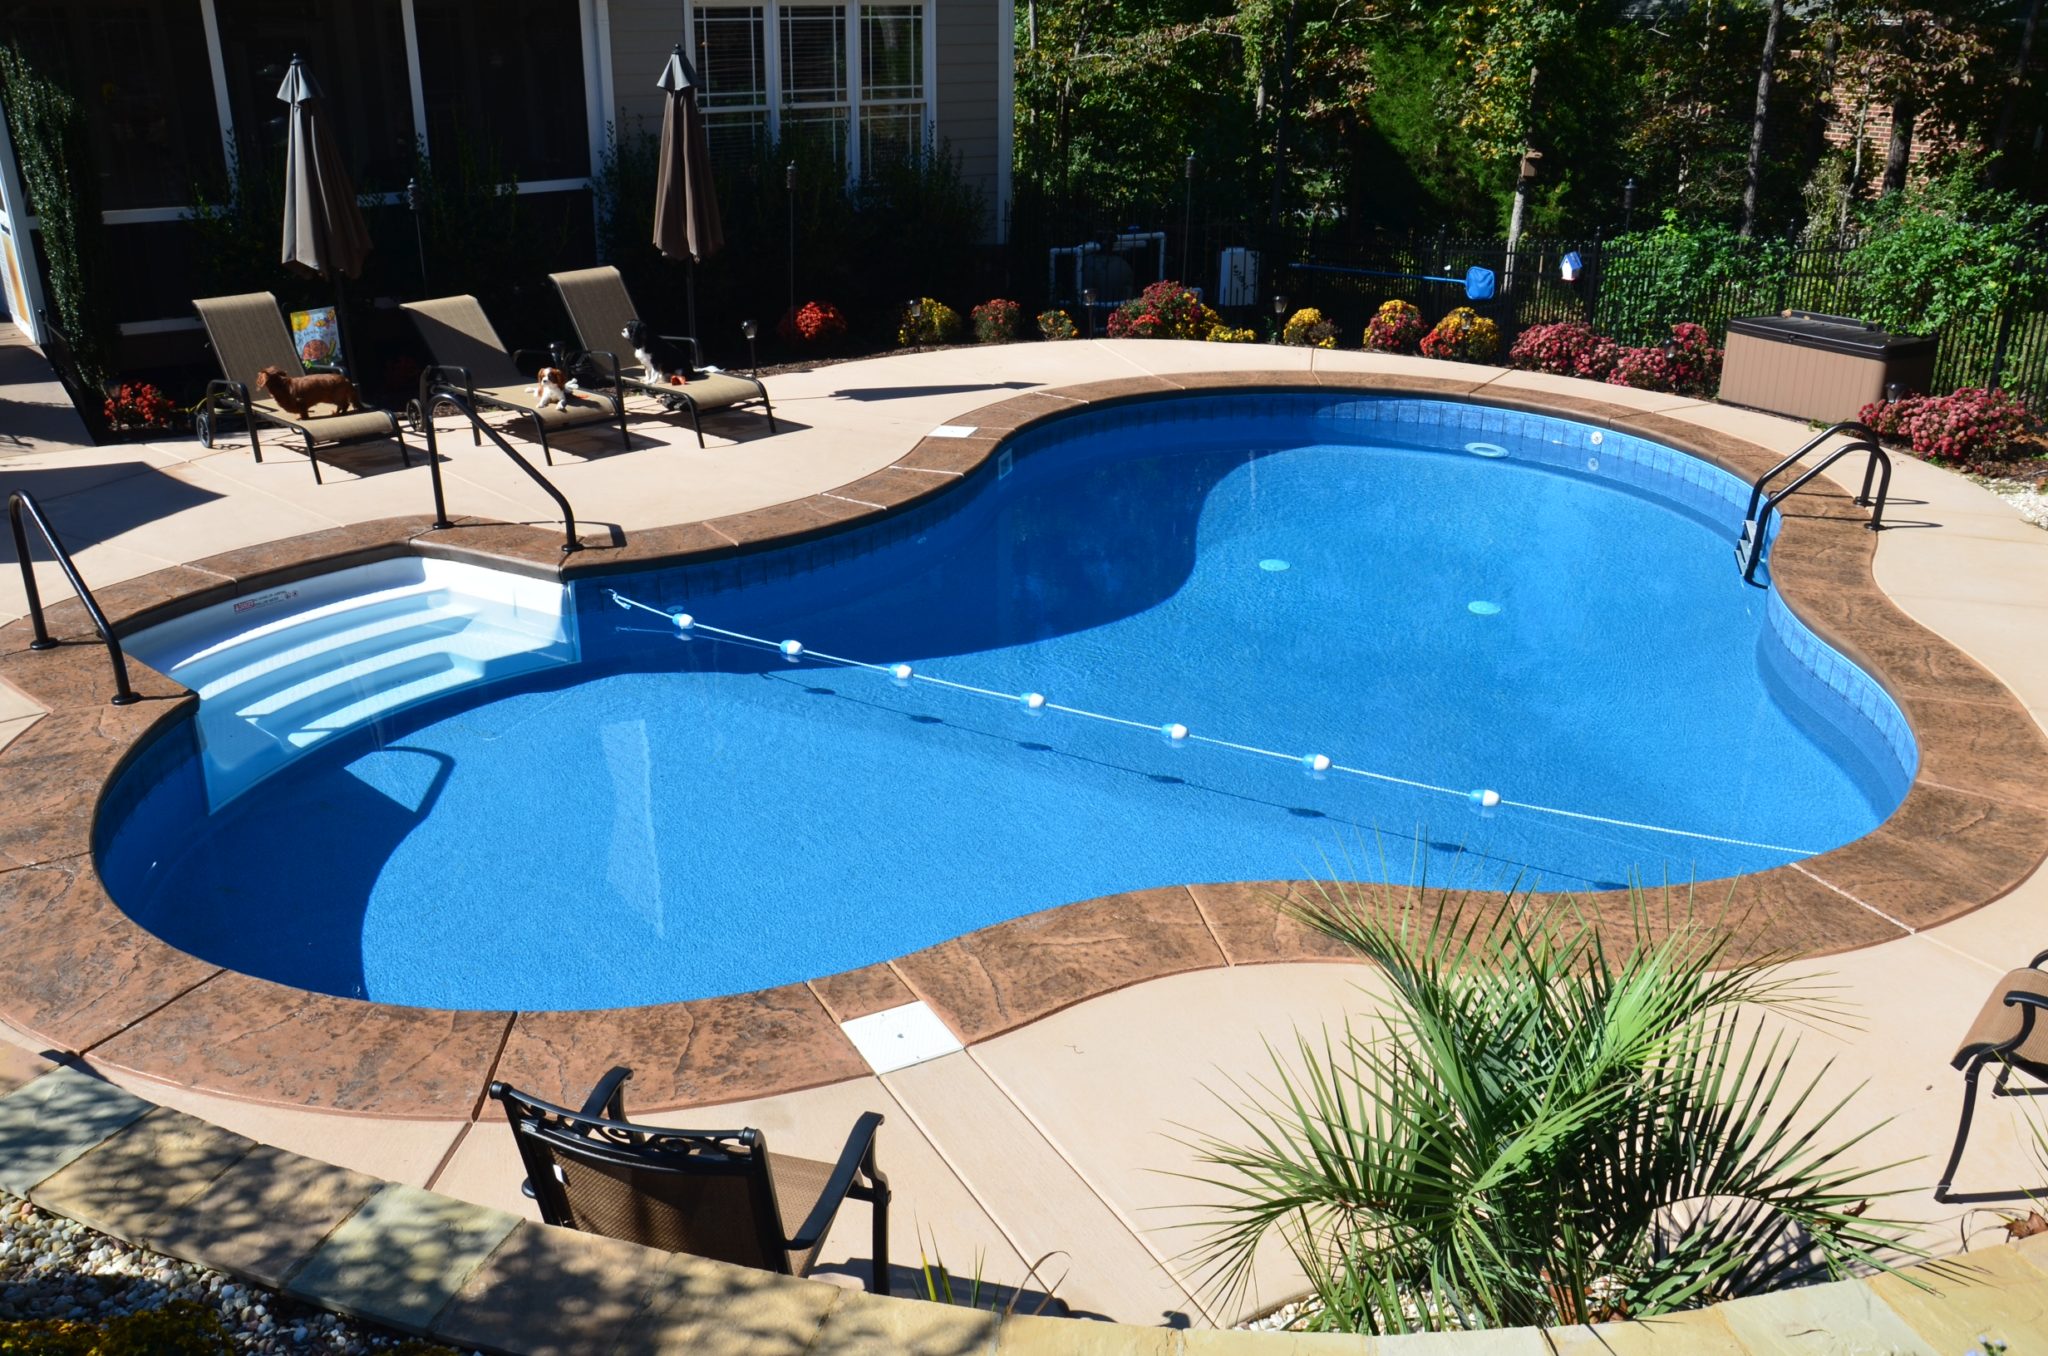 Rising sun pools and spas backyard pool with lane rope